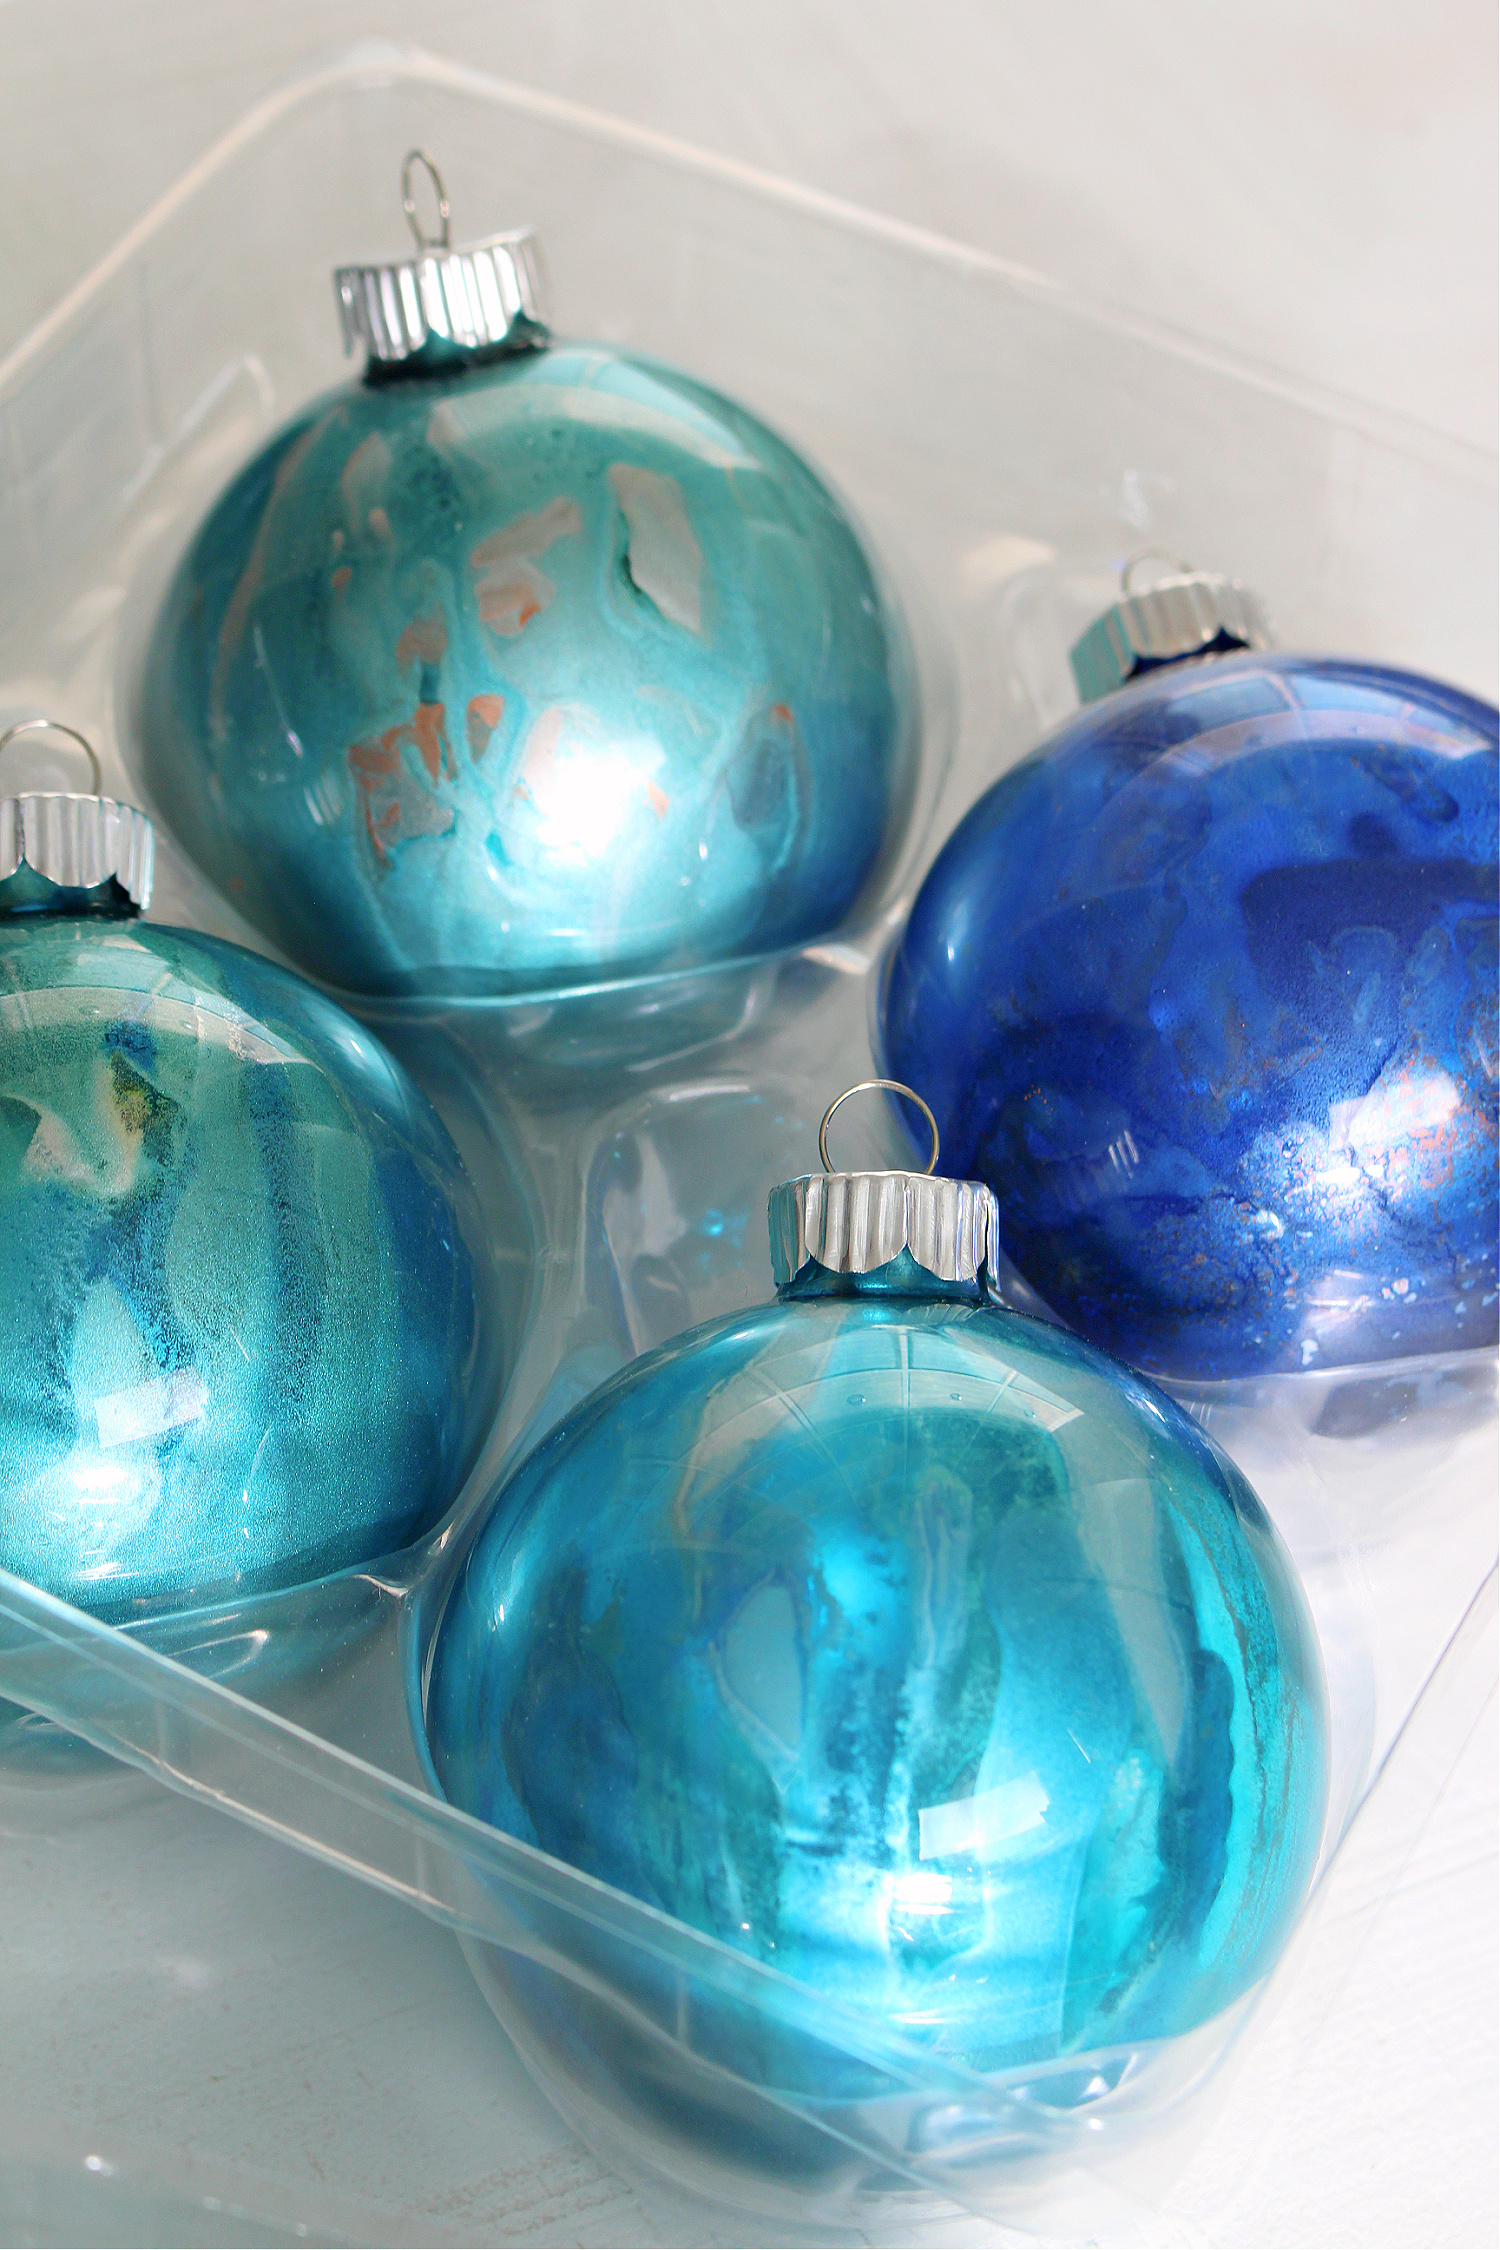 Homemade Ornaments That Don't Look Handmade